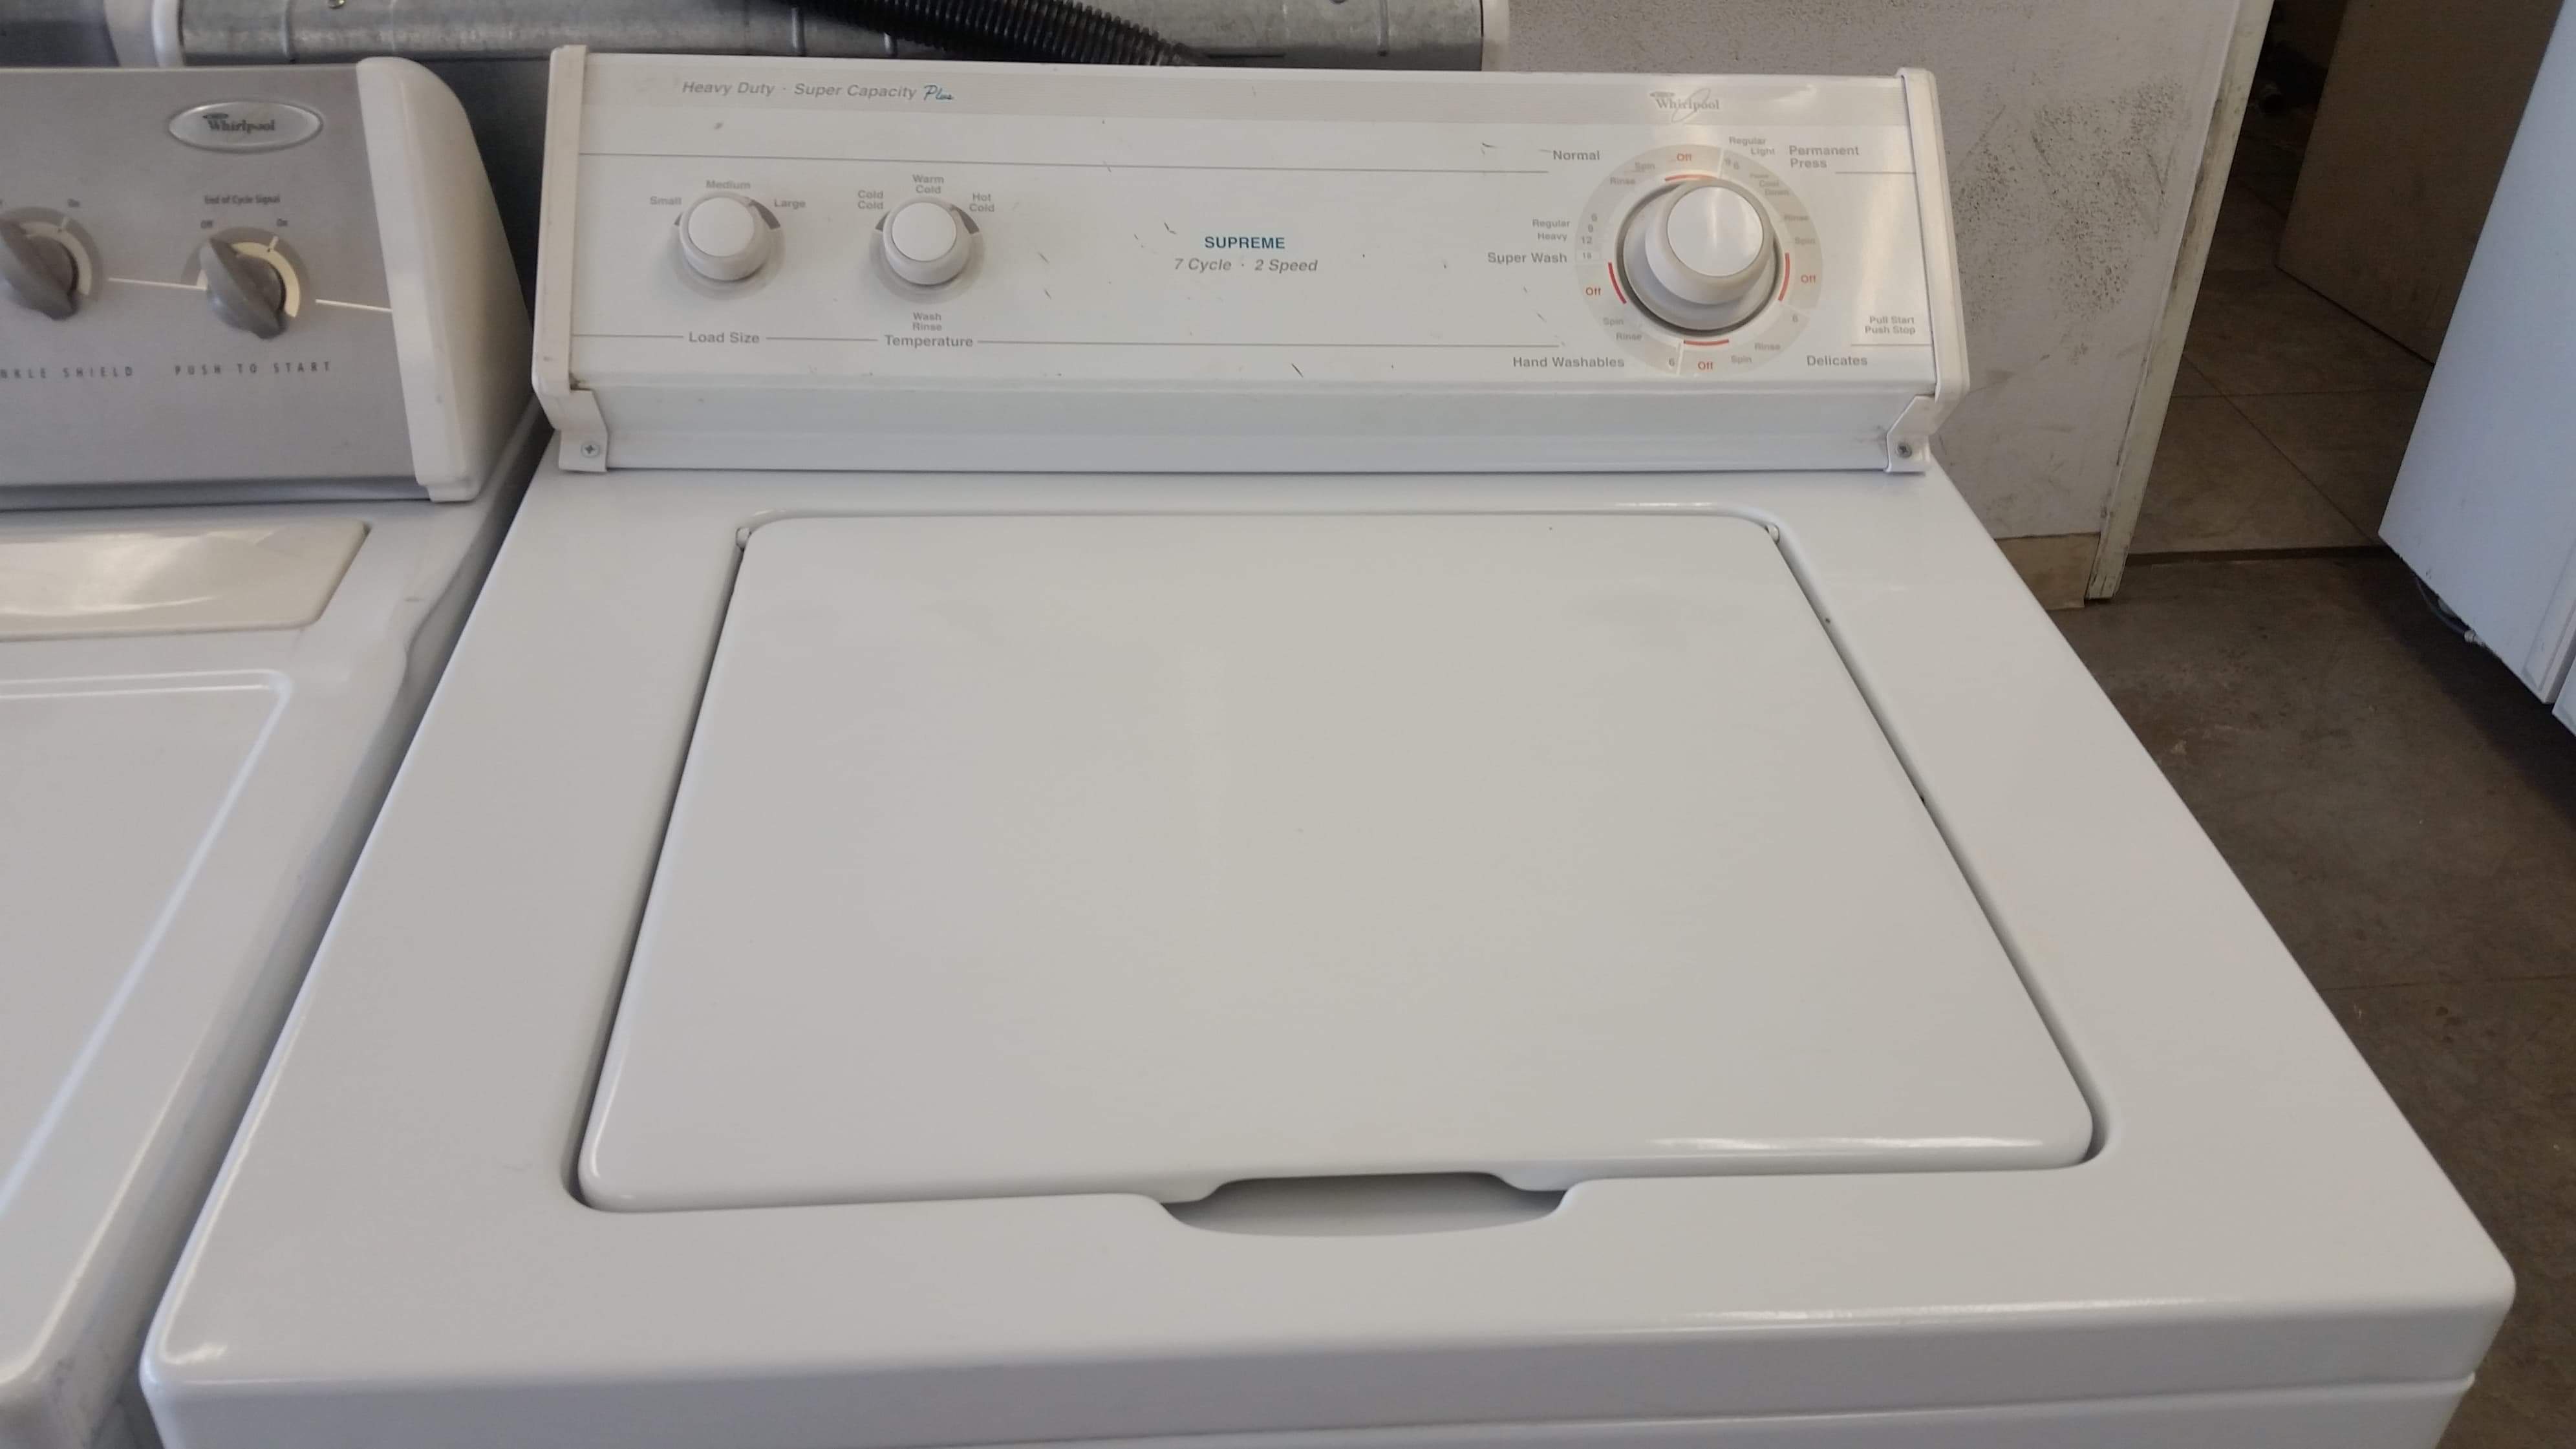 Washer I paid for